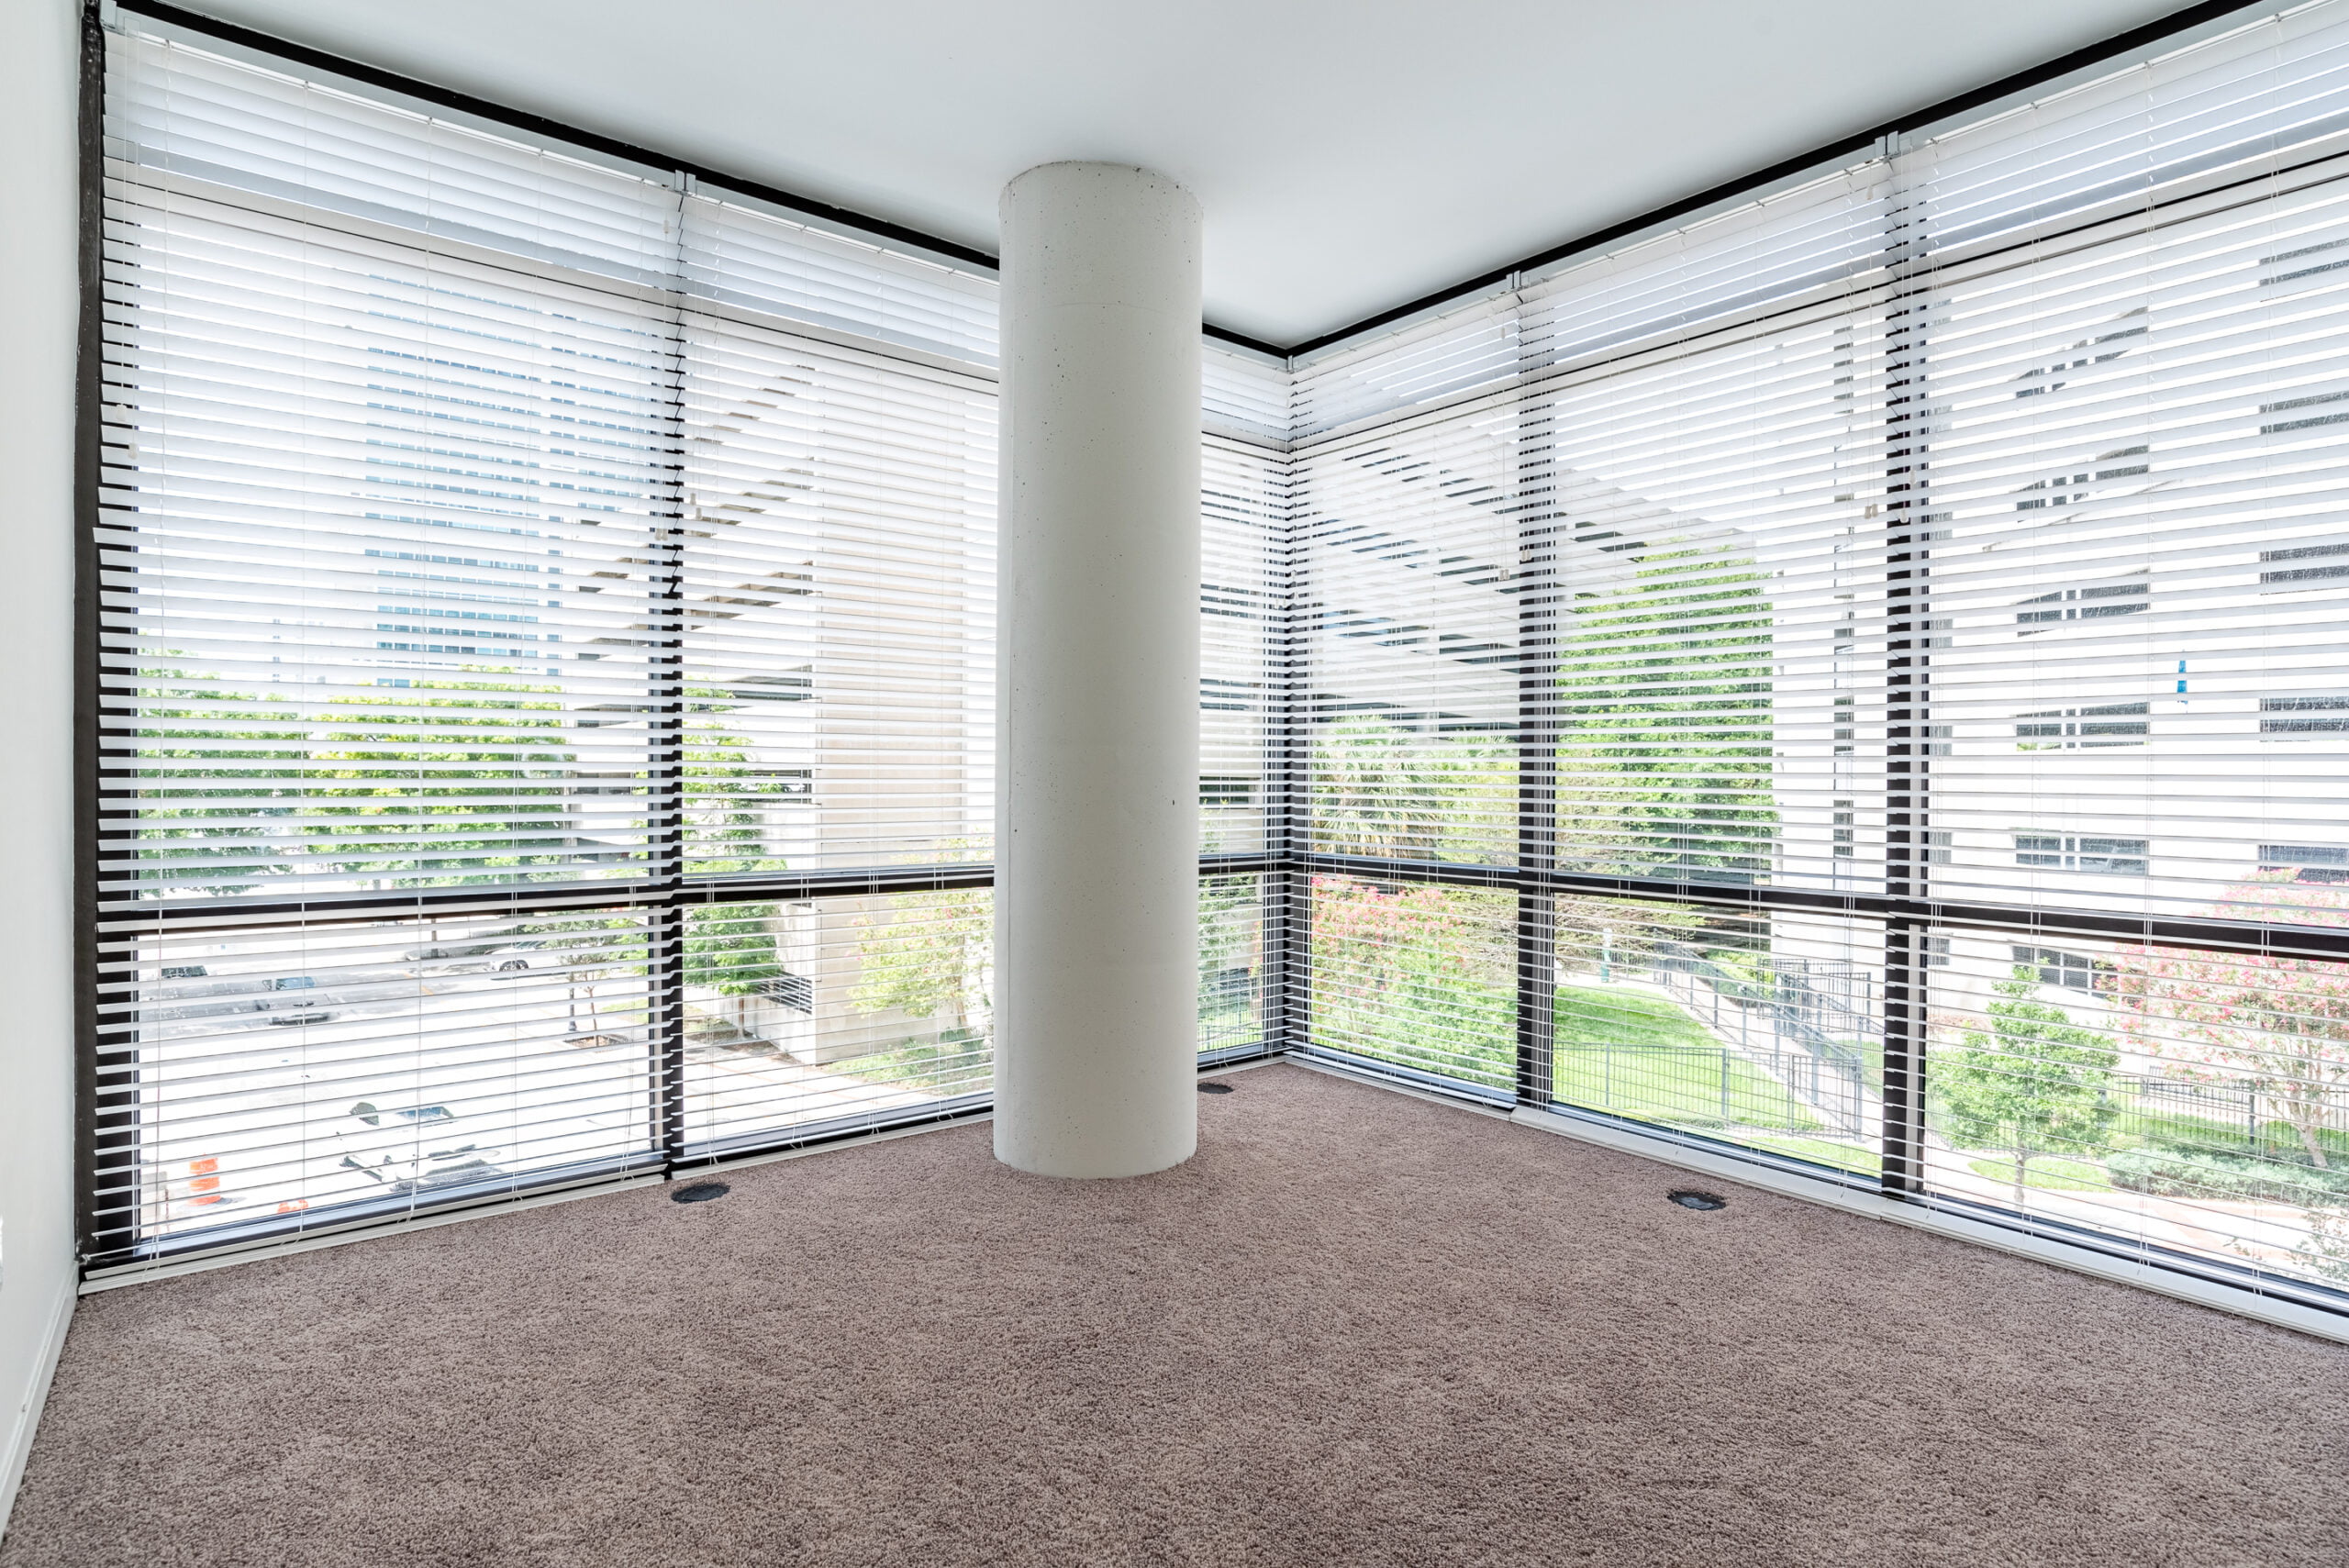 This photo features a room with a large column in the center, wall-to-wall windows covered by horizontal blinds, and a carpeted floor, providing an unobstructed urban view.